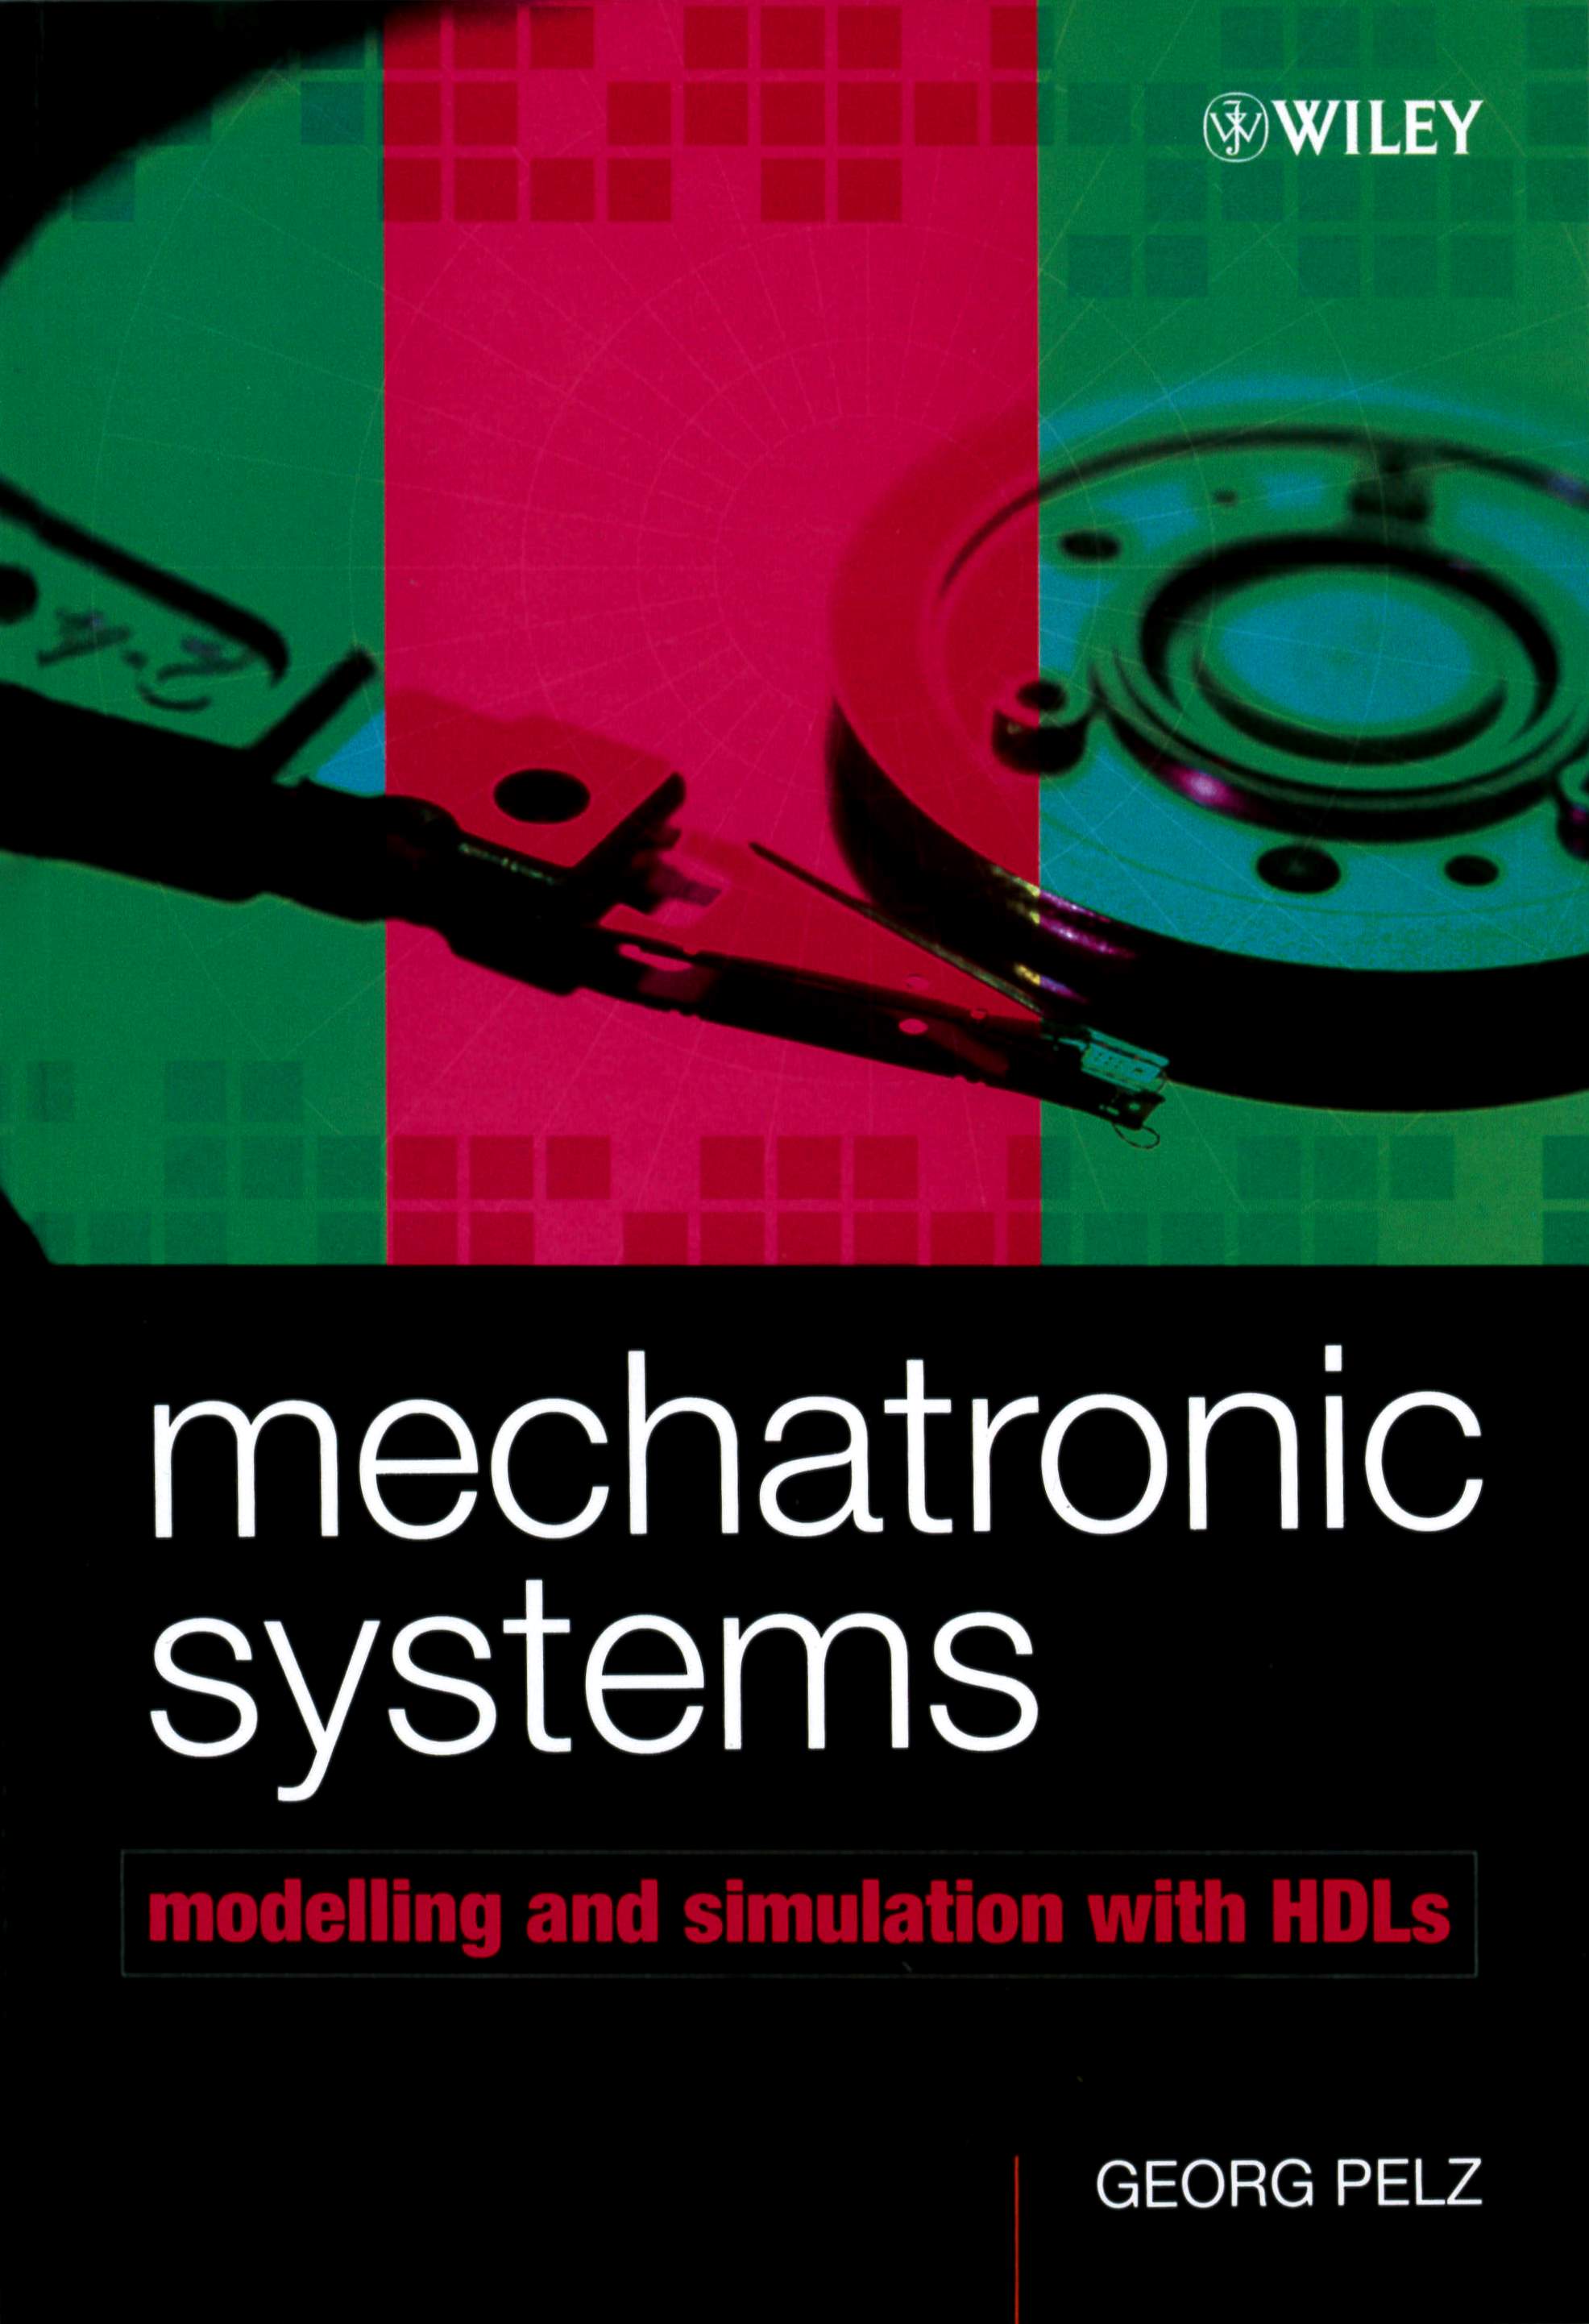 Mechatronic Systems: Modelling and Simulation with HDLs